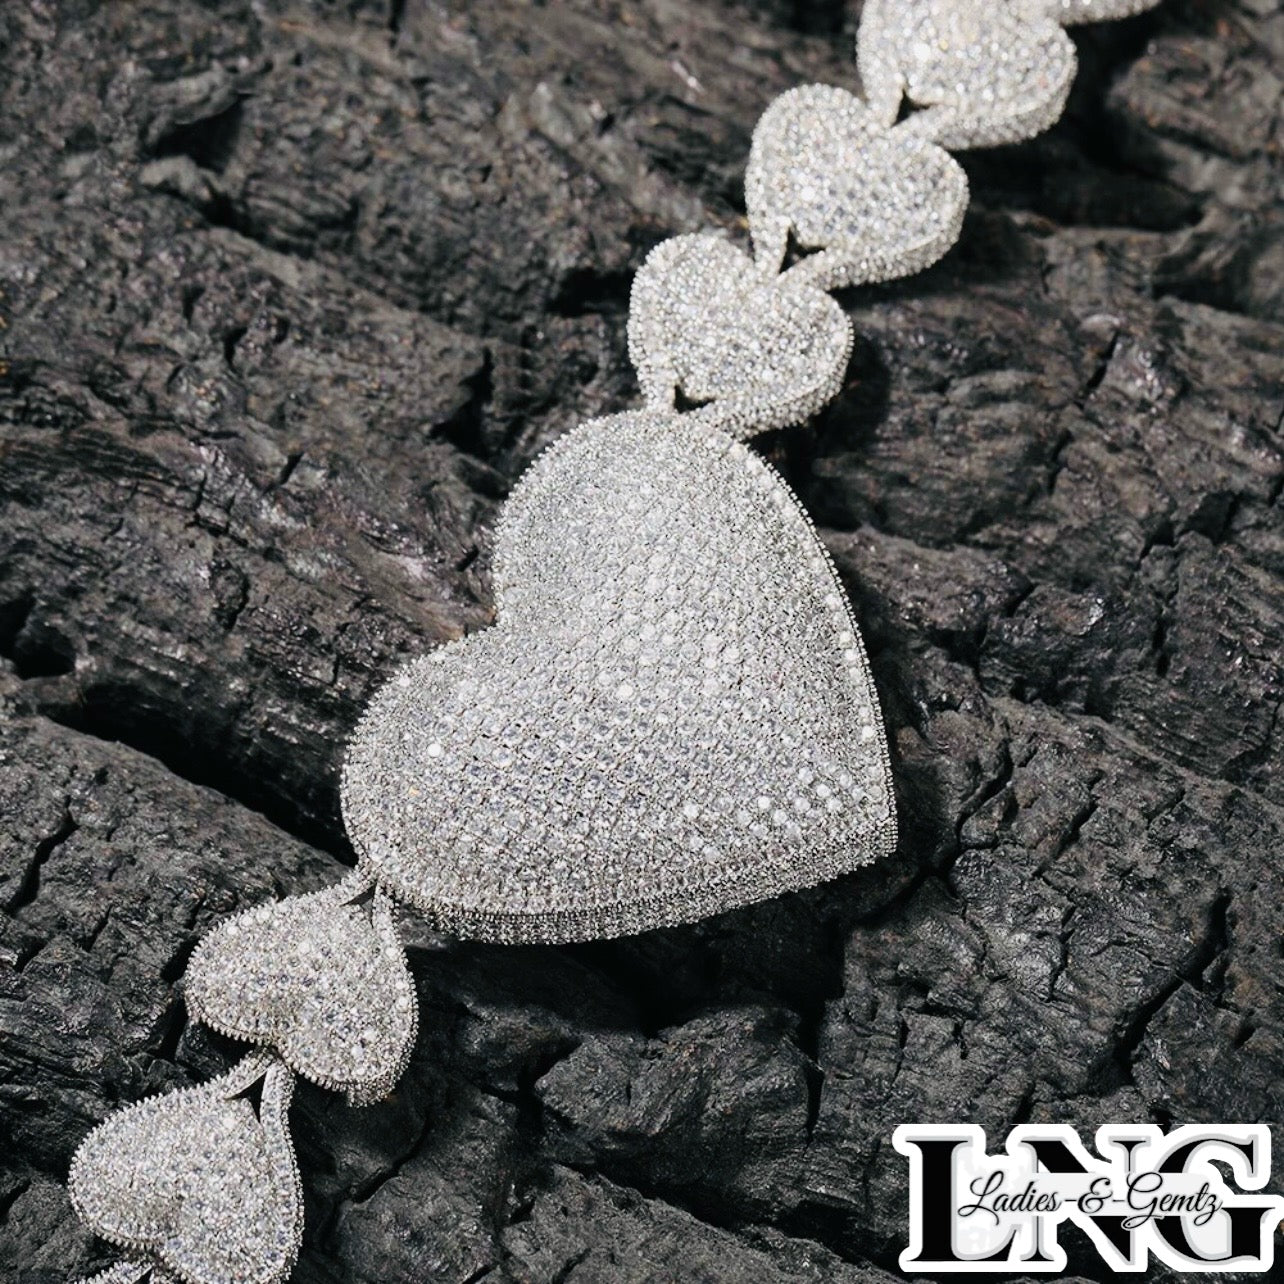 Sapphire Micro Pave AAAAA Cubic Zirconia Heart Pendant Necklace in Vermeil 14k White Gold By LadiesNGentz Boutique purchase at LadiesNGentz.com or Facetreasures.com